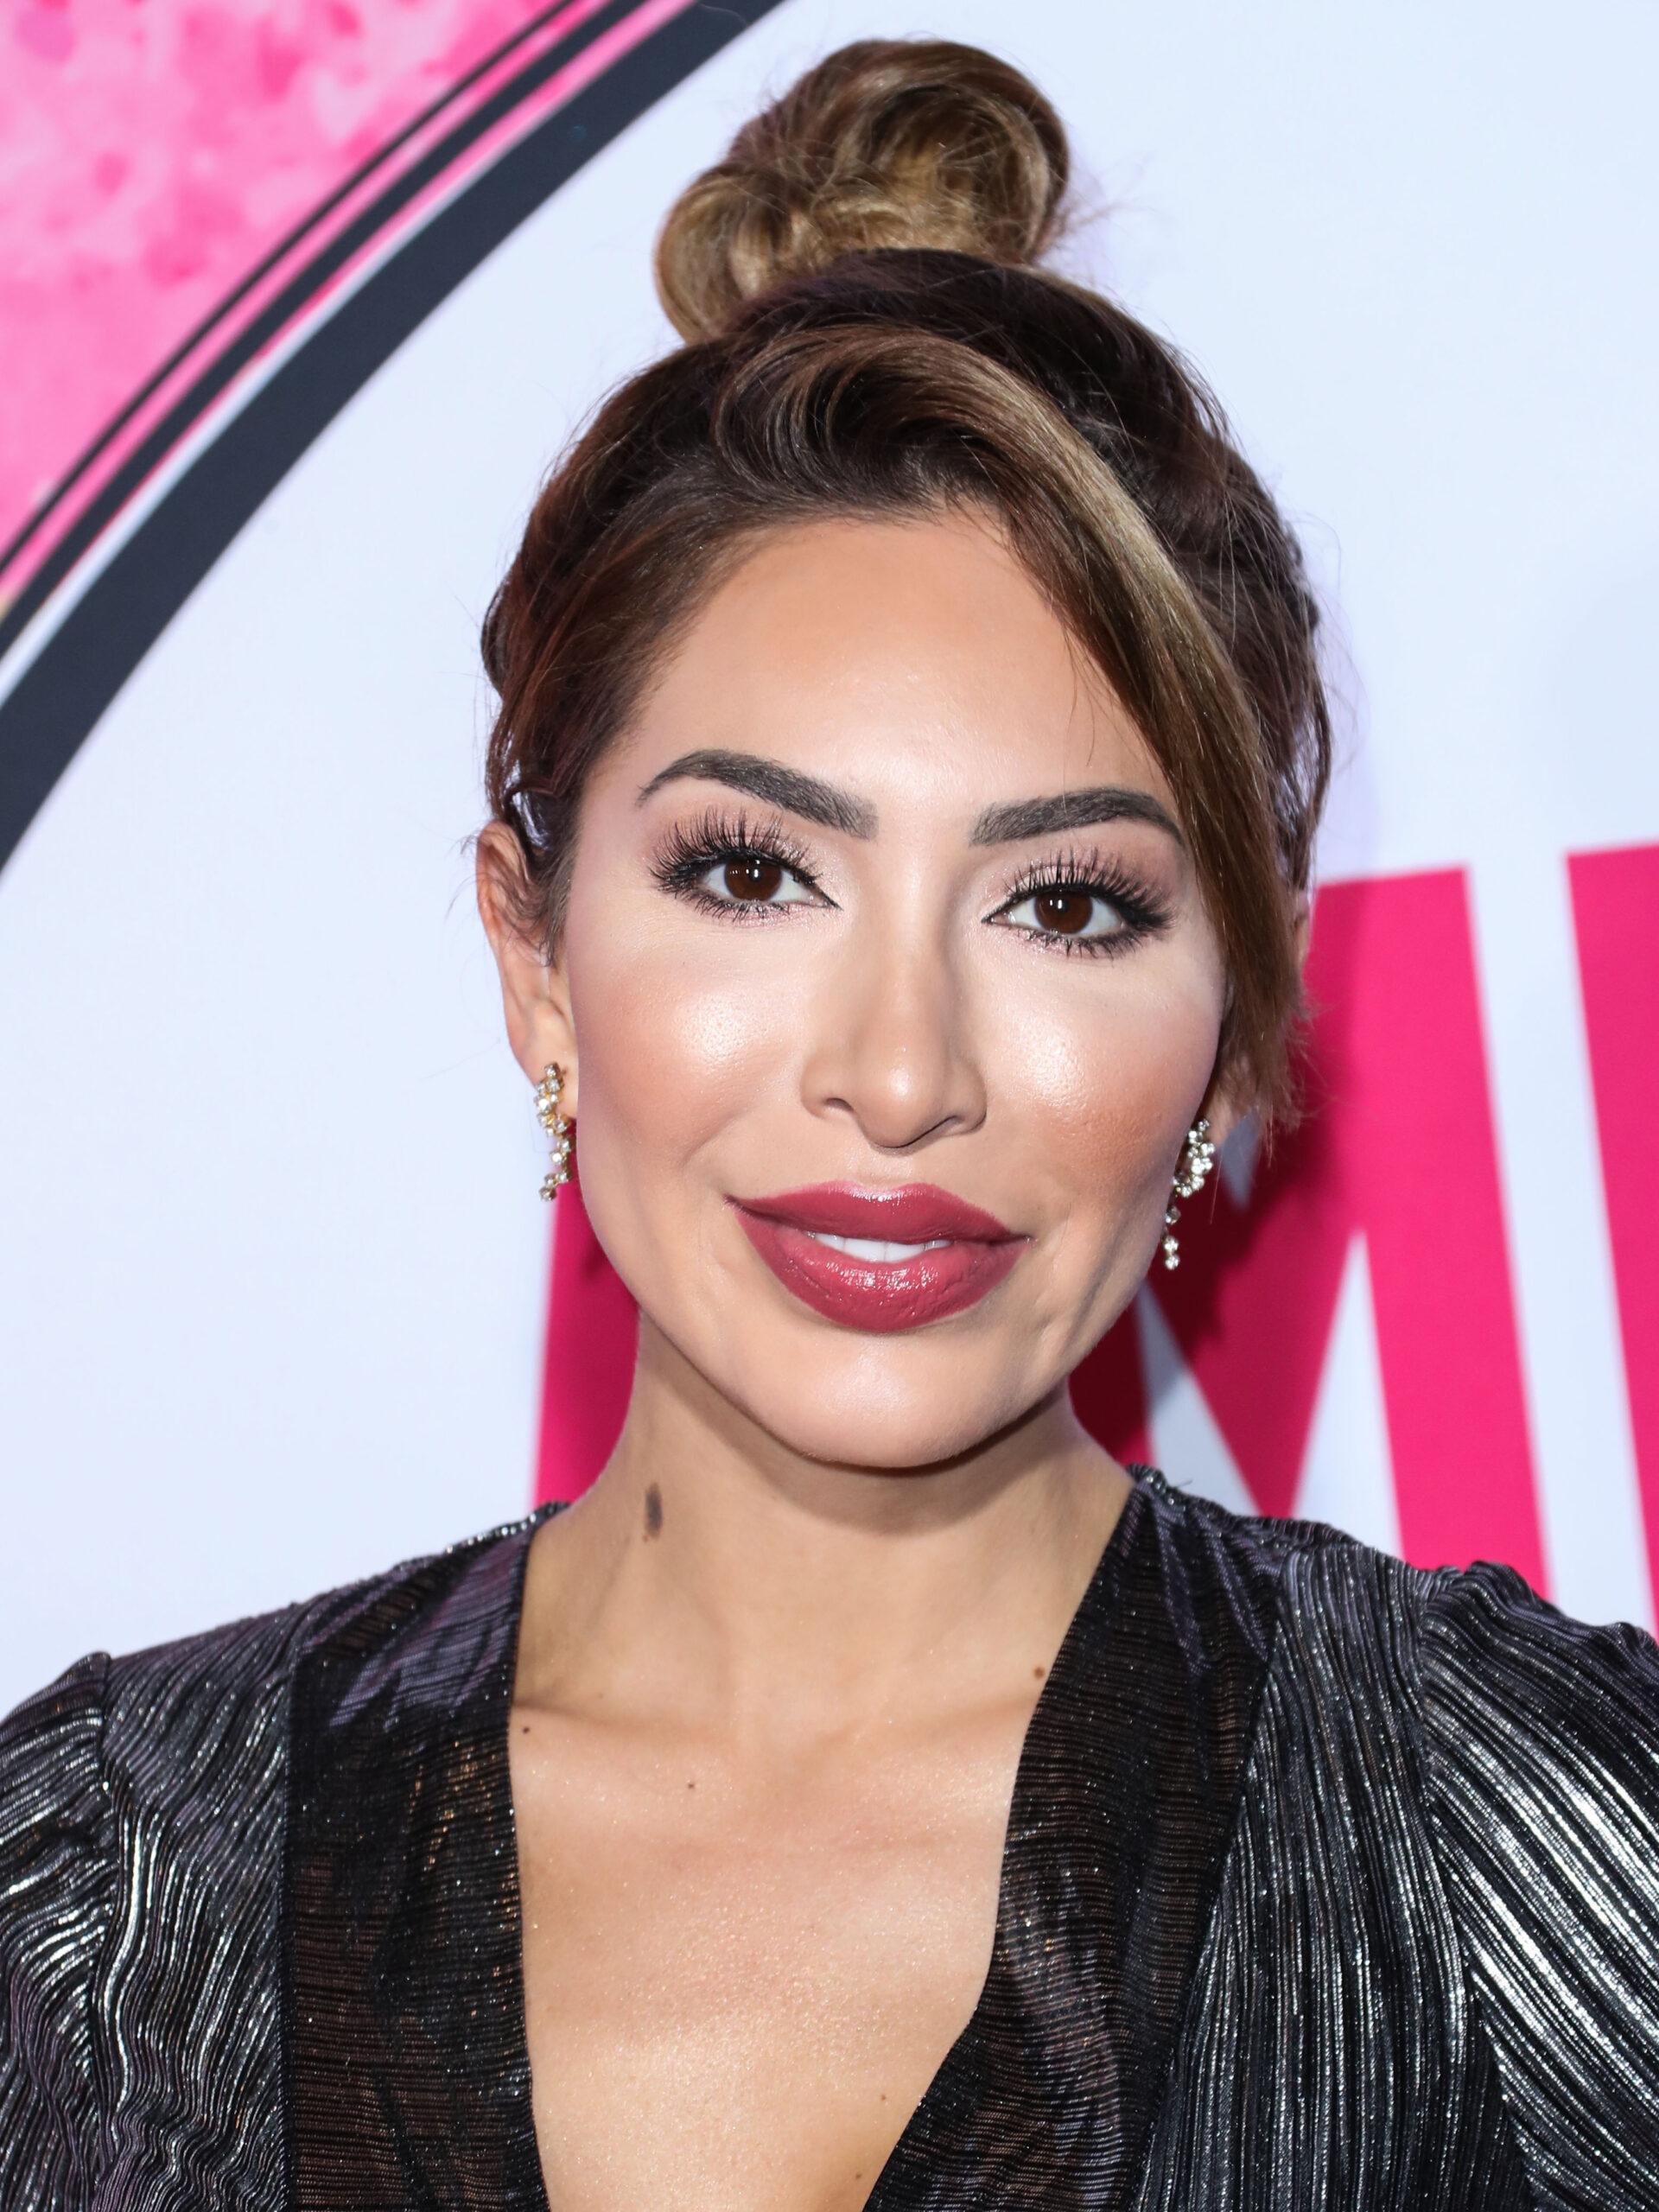 Farrah Abraham Sued For Allegedly Assaulting A Security Guard 247 News Around The World